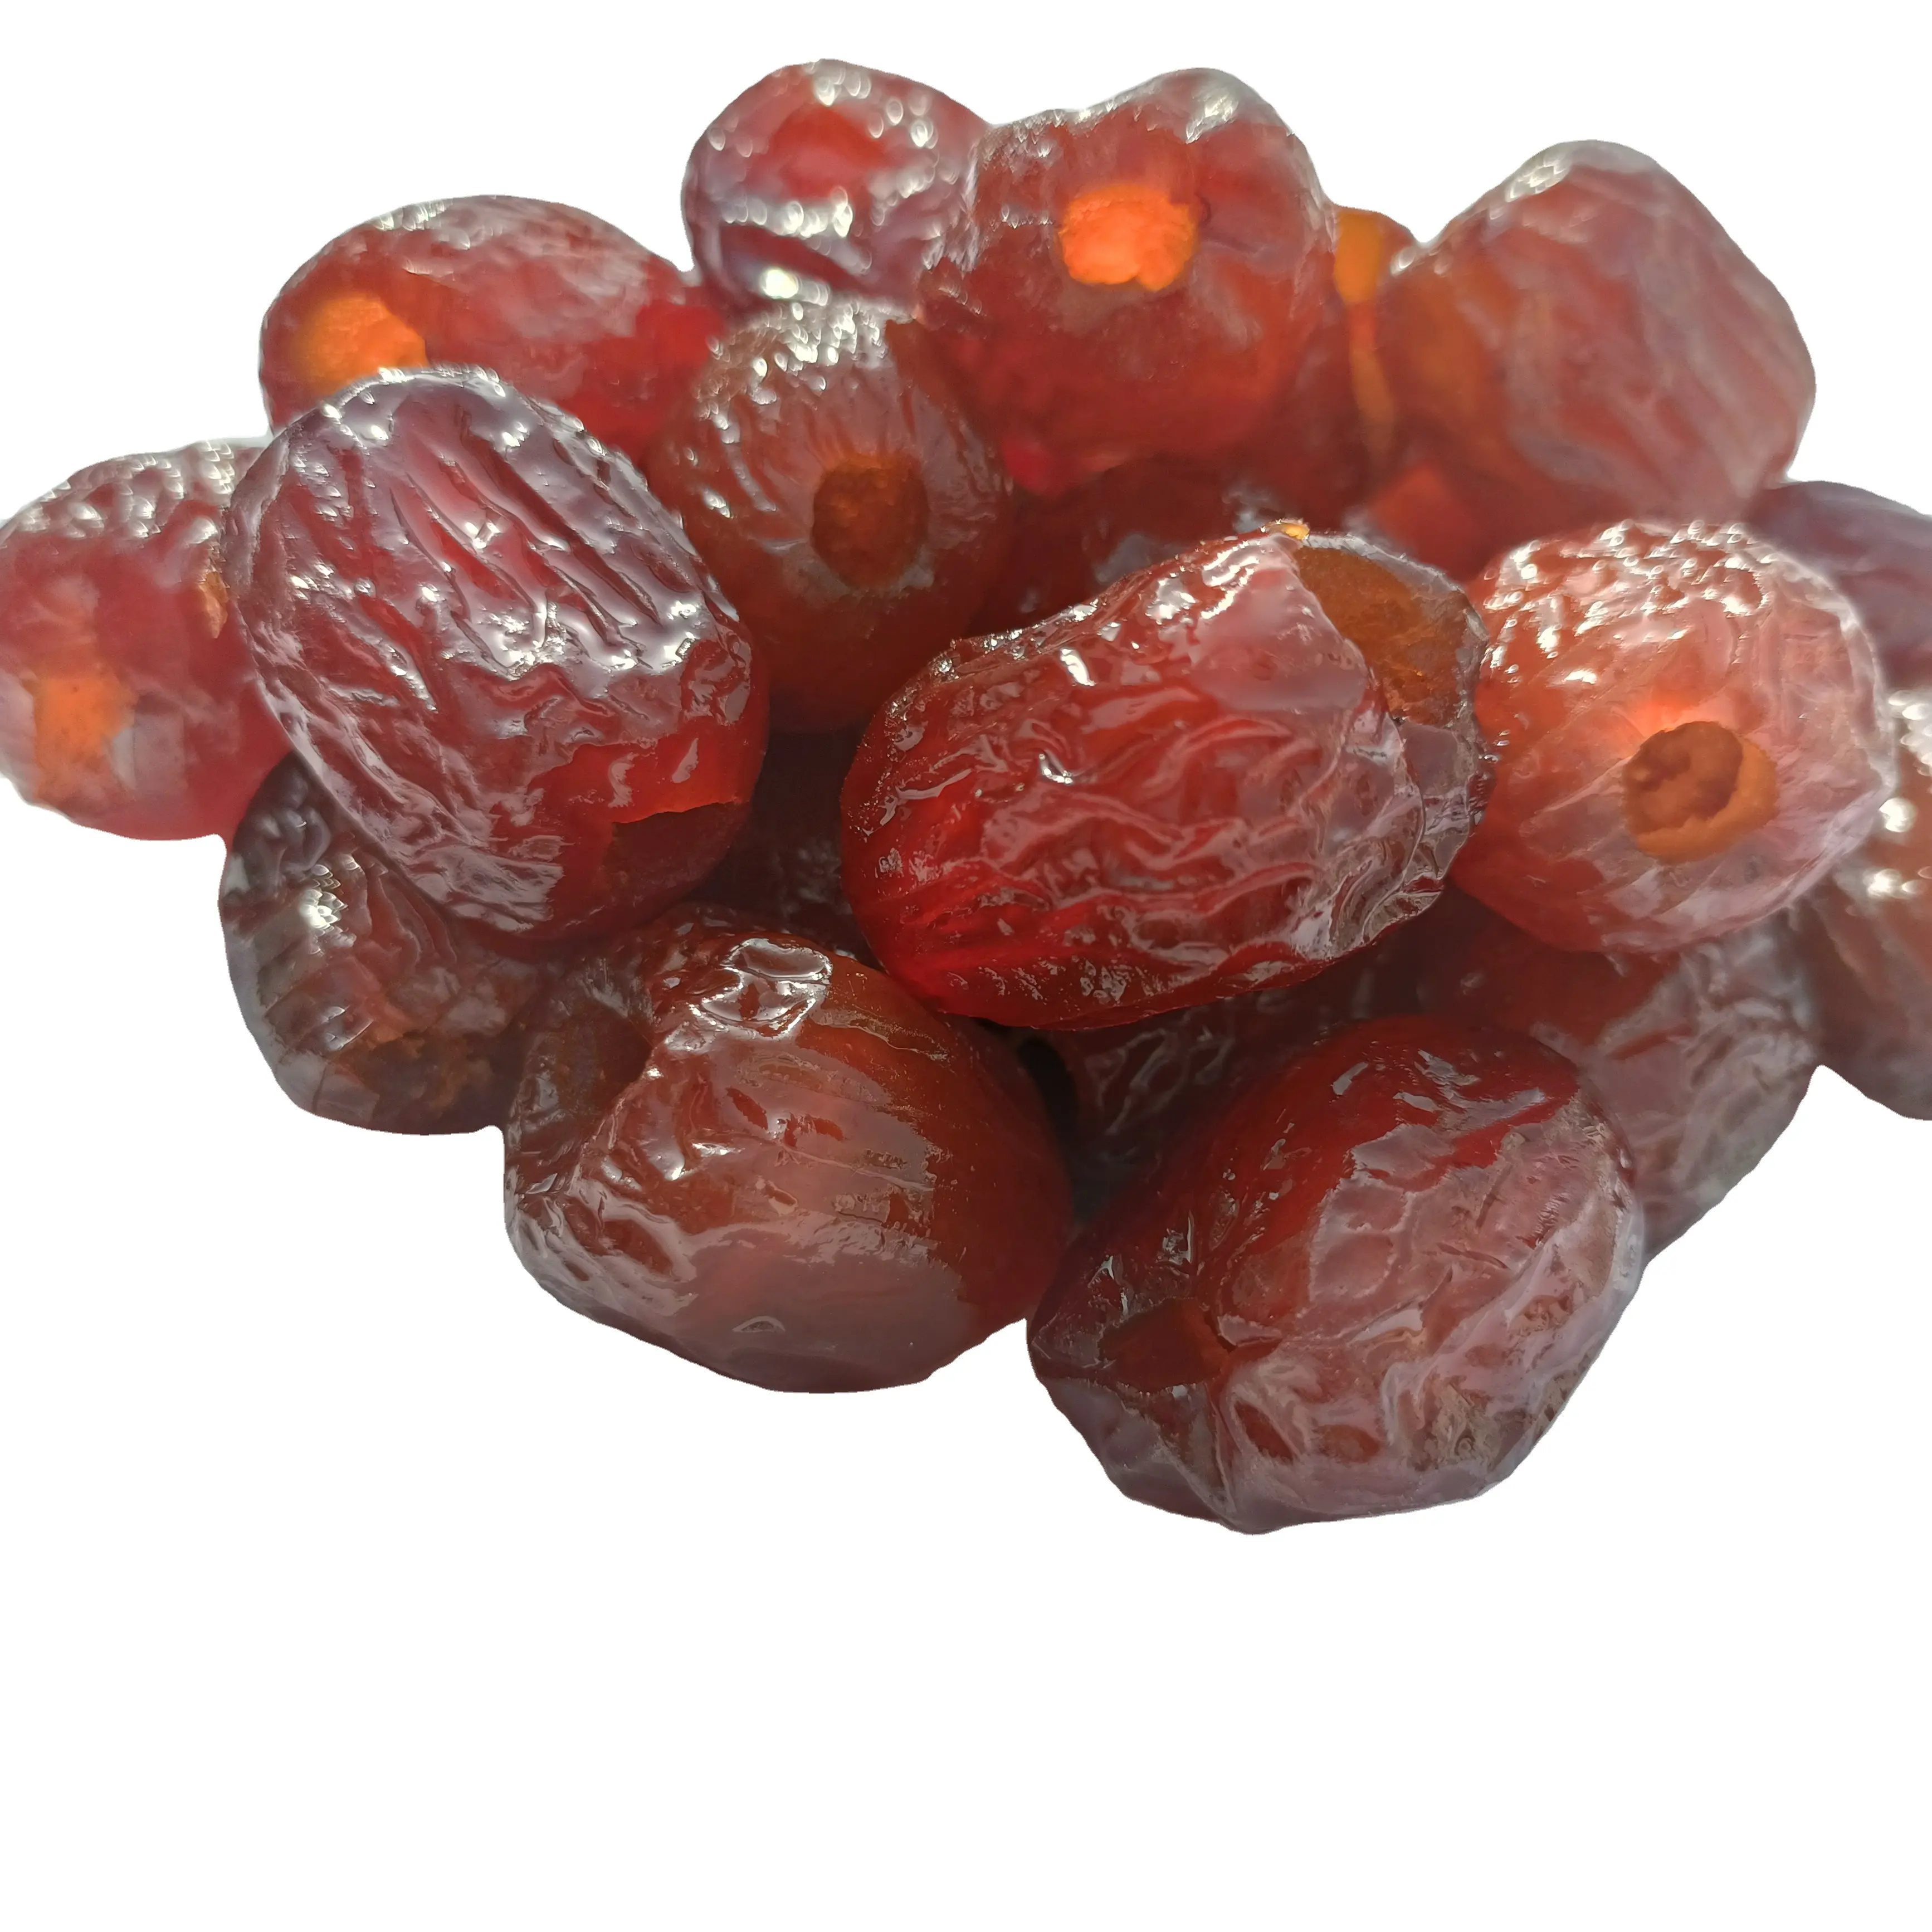 Dehydrated Soft Dried Candied Dates Preserved Fruit